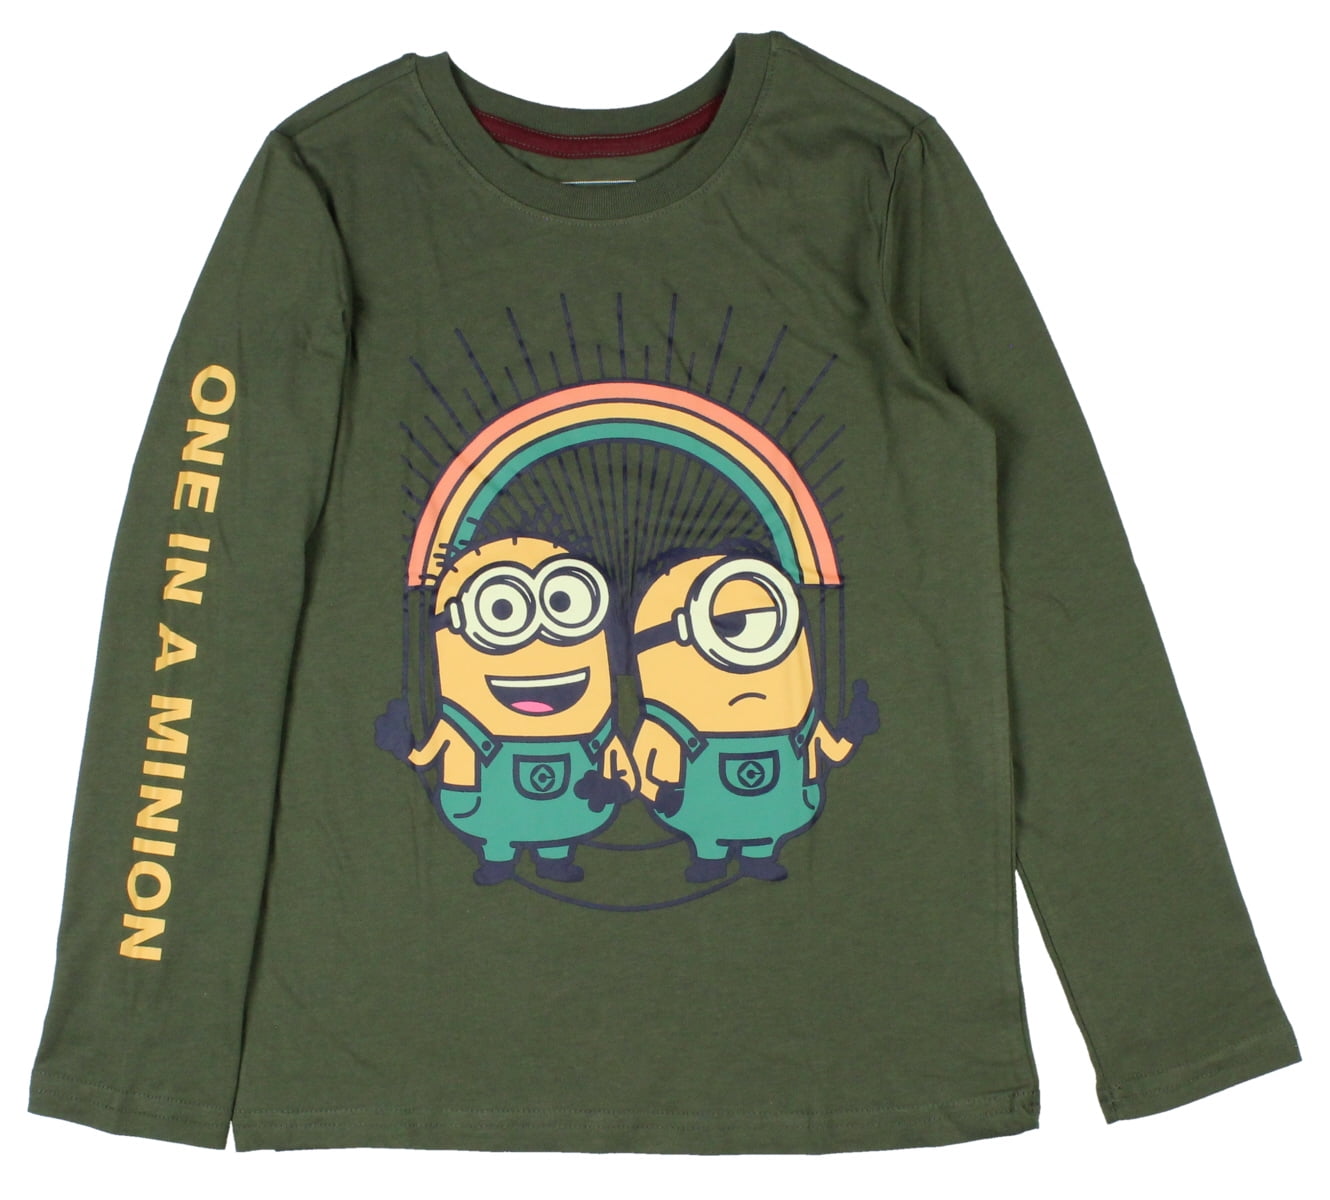 Boys Official Despicable Me Minions & Avengers Long Sleeve Top 4 to 10 Years 